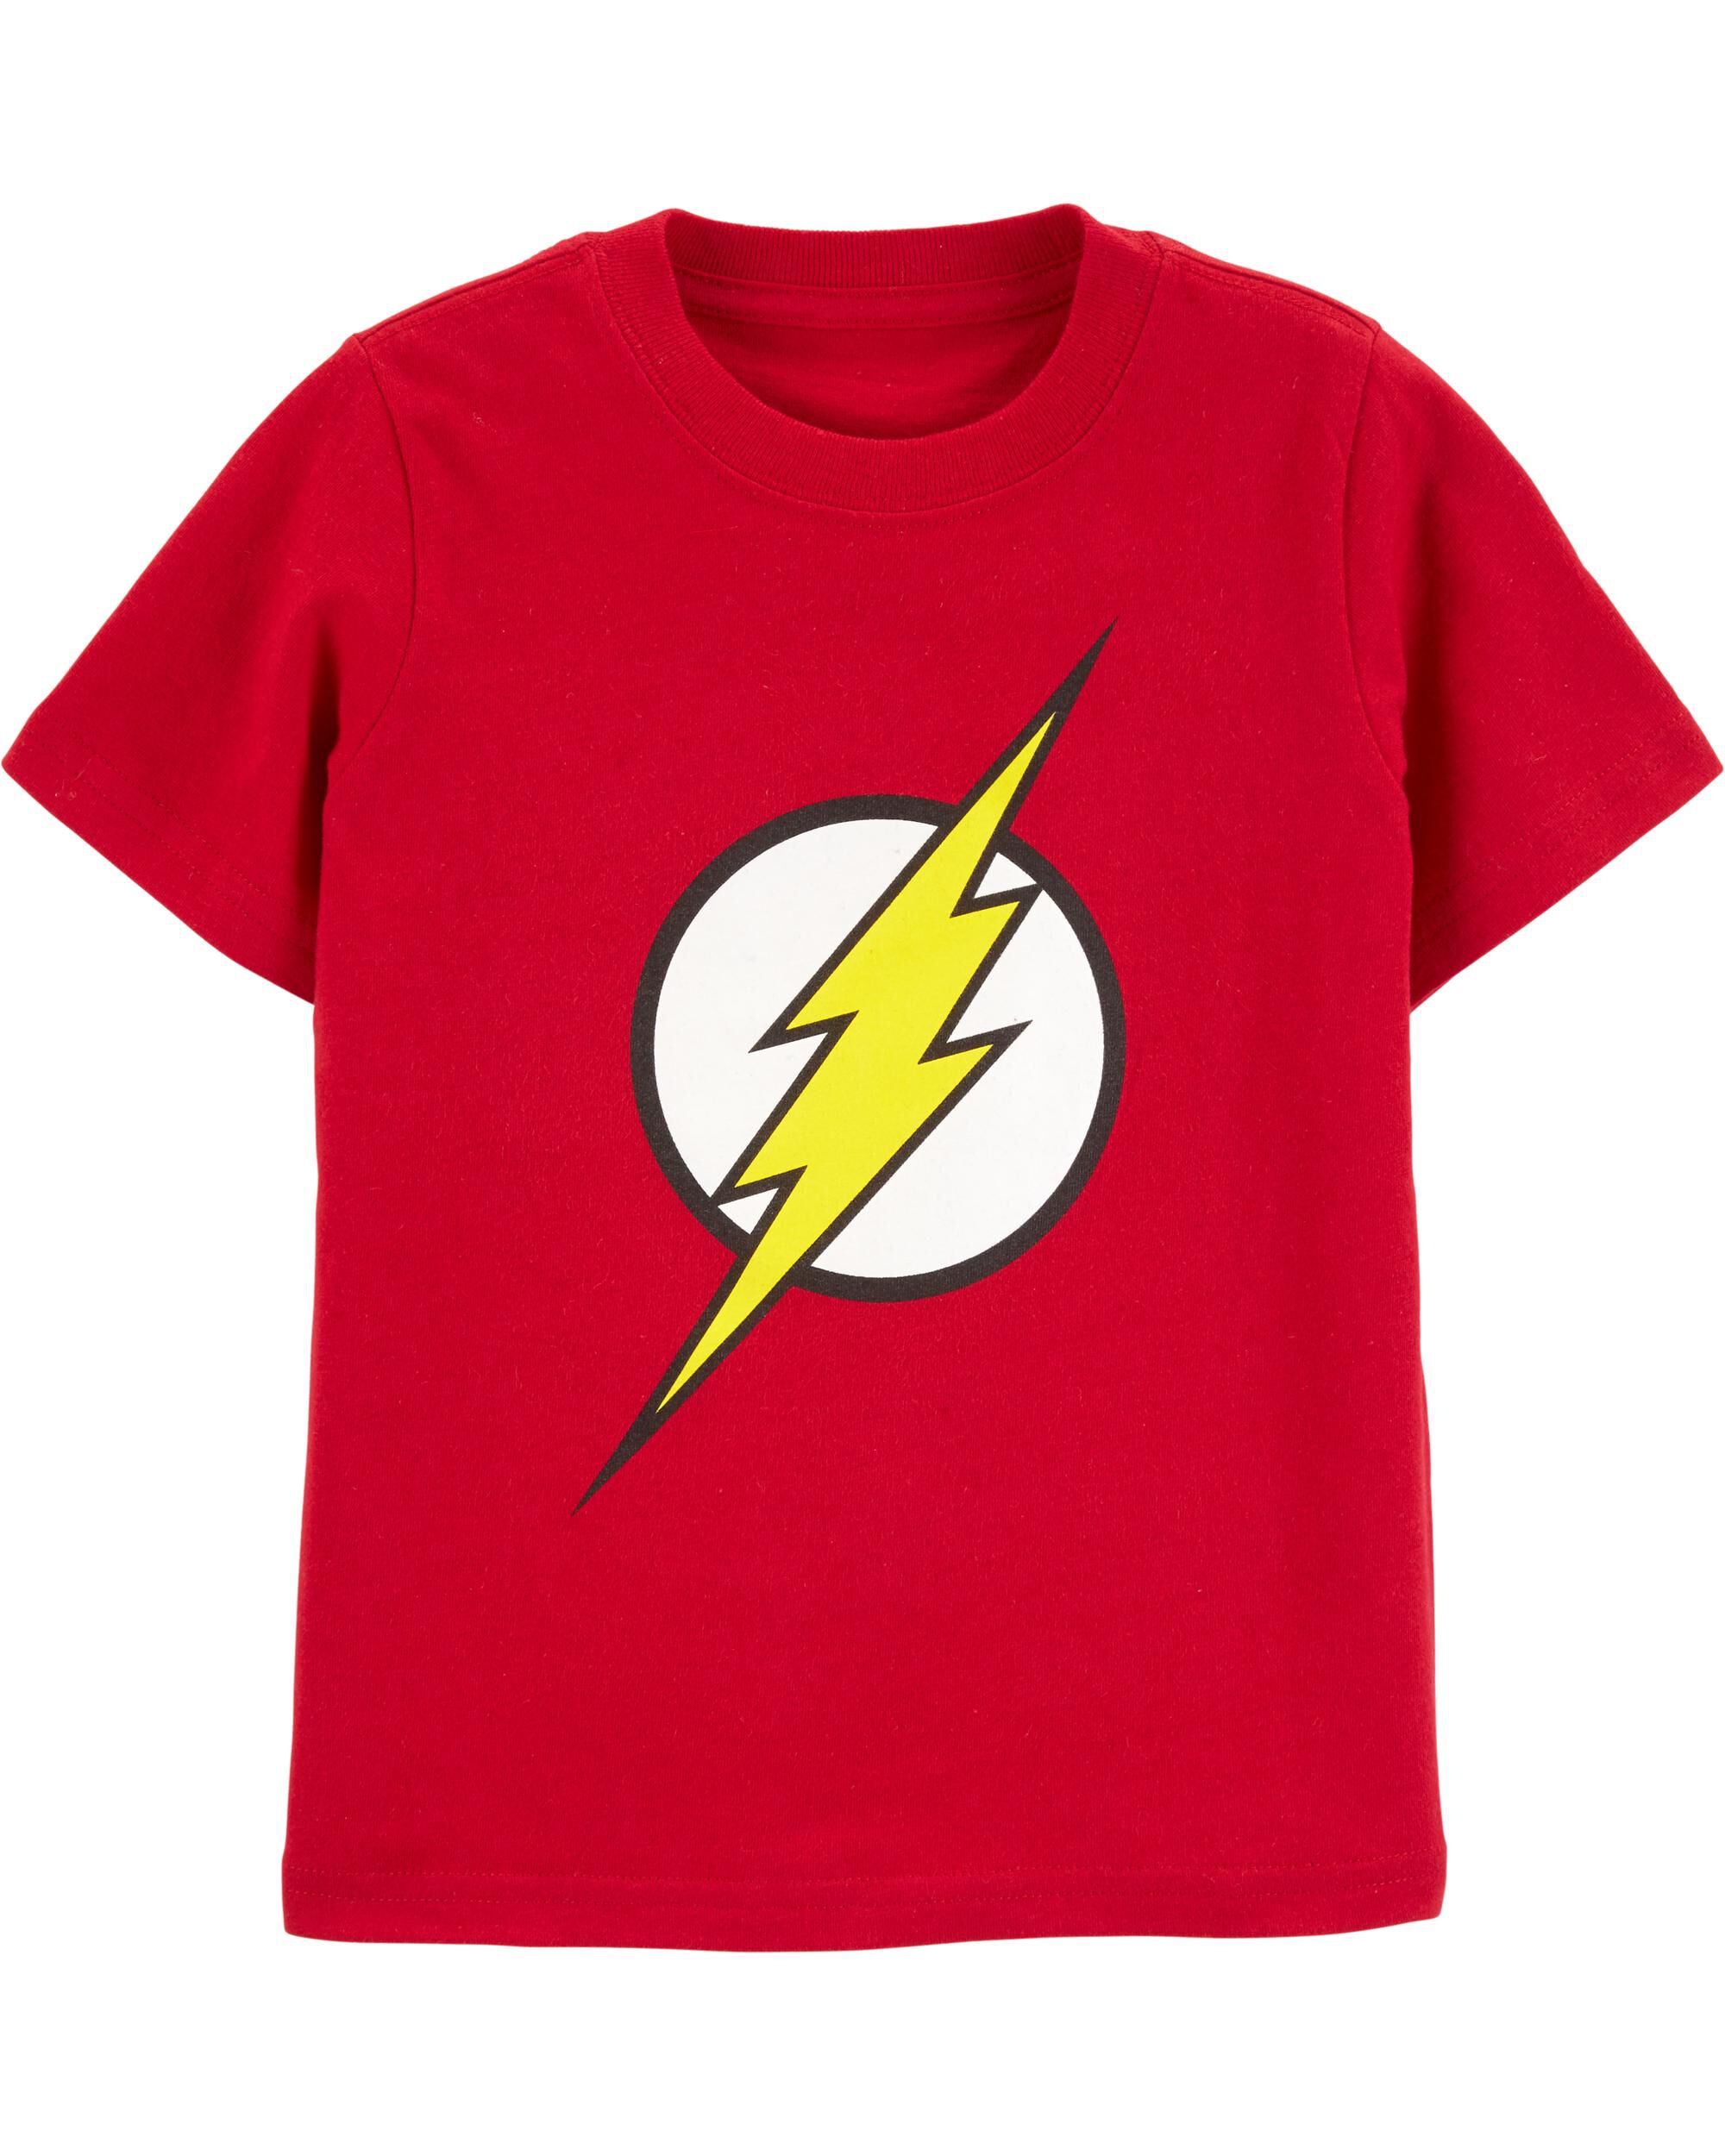 the flash baby clothes